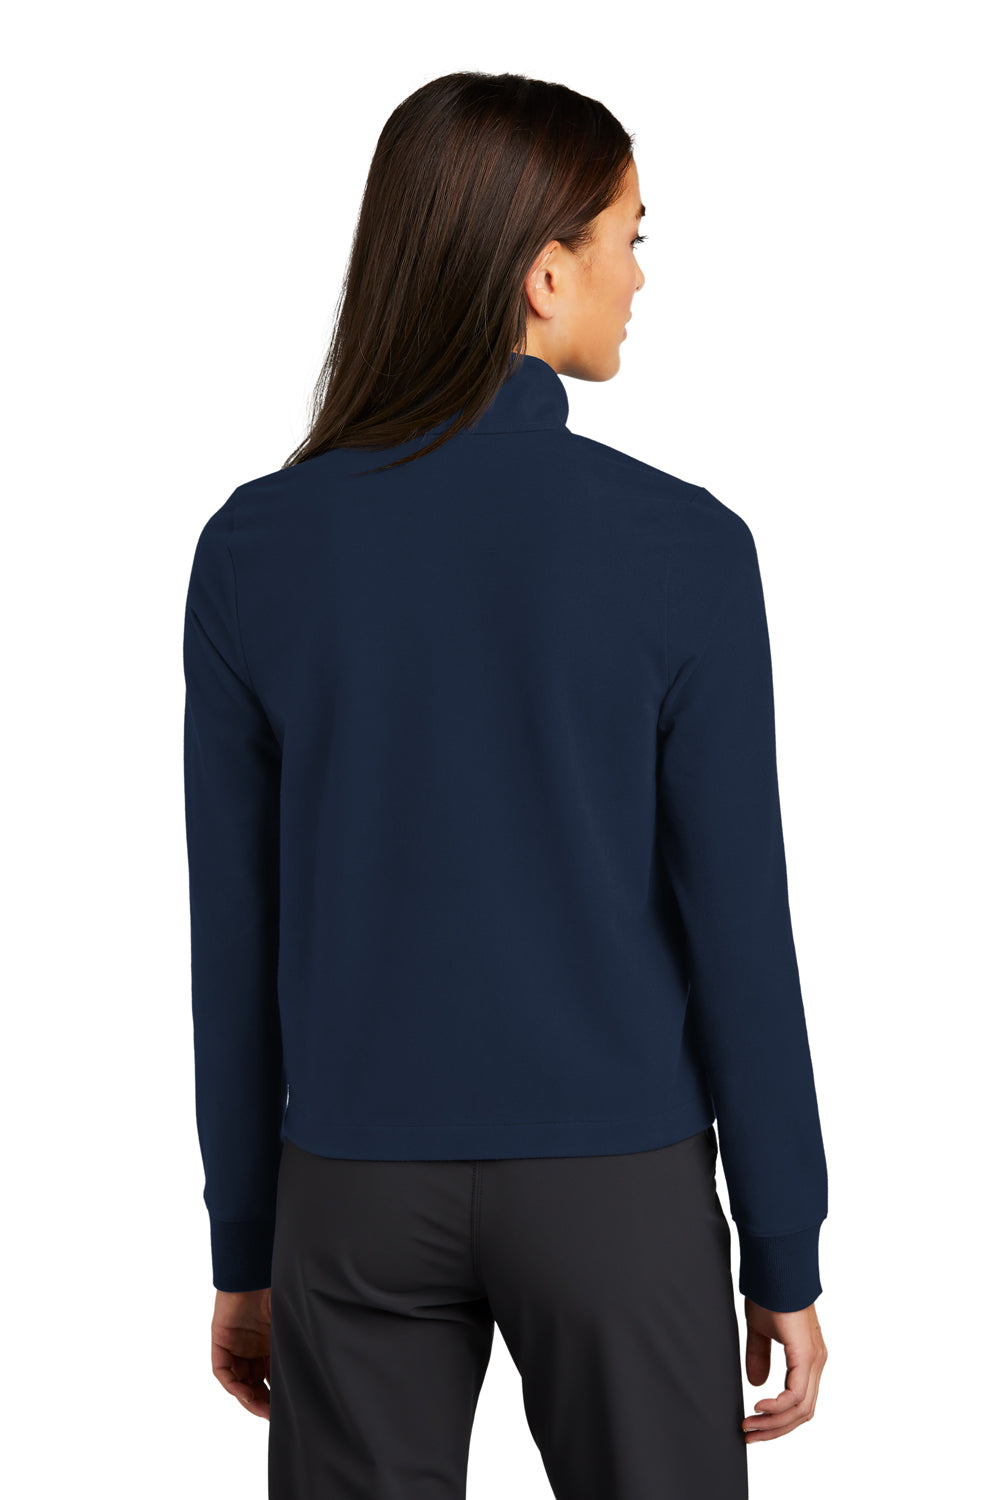 Ogio Womens Outstretch Full Zip Jacket River Navy Blue Back